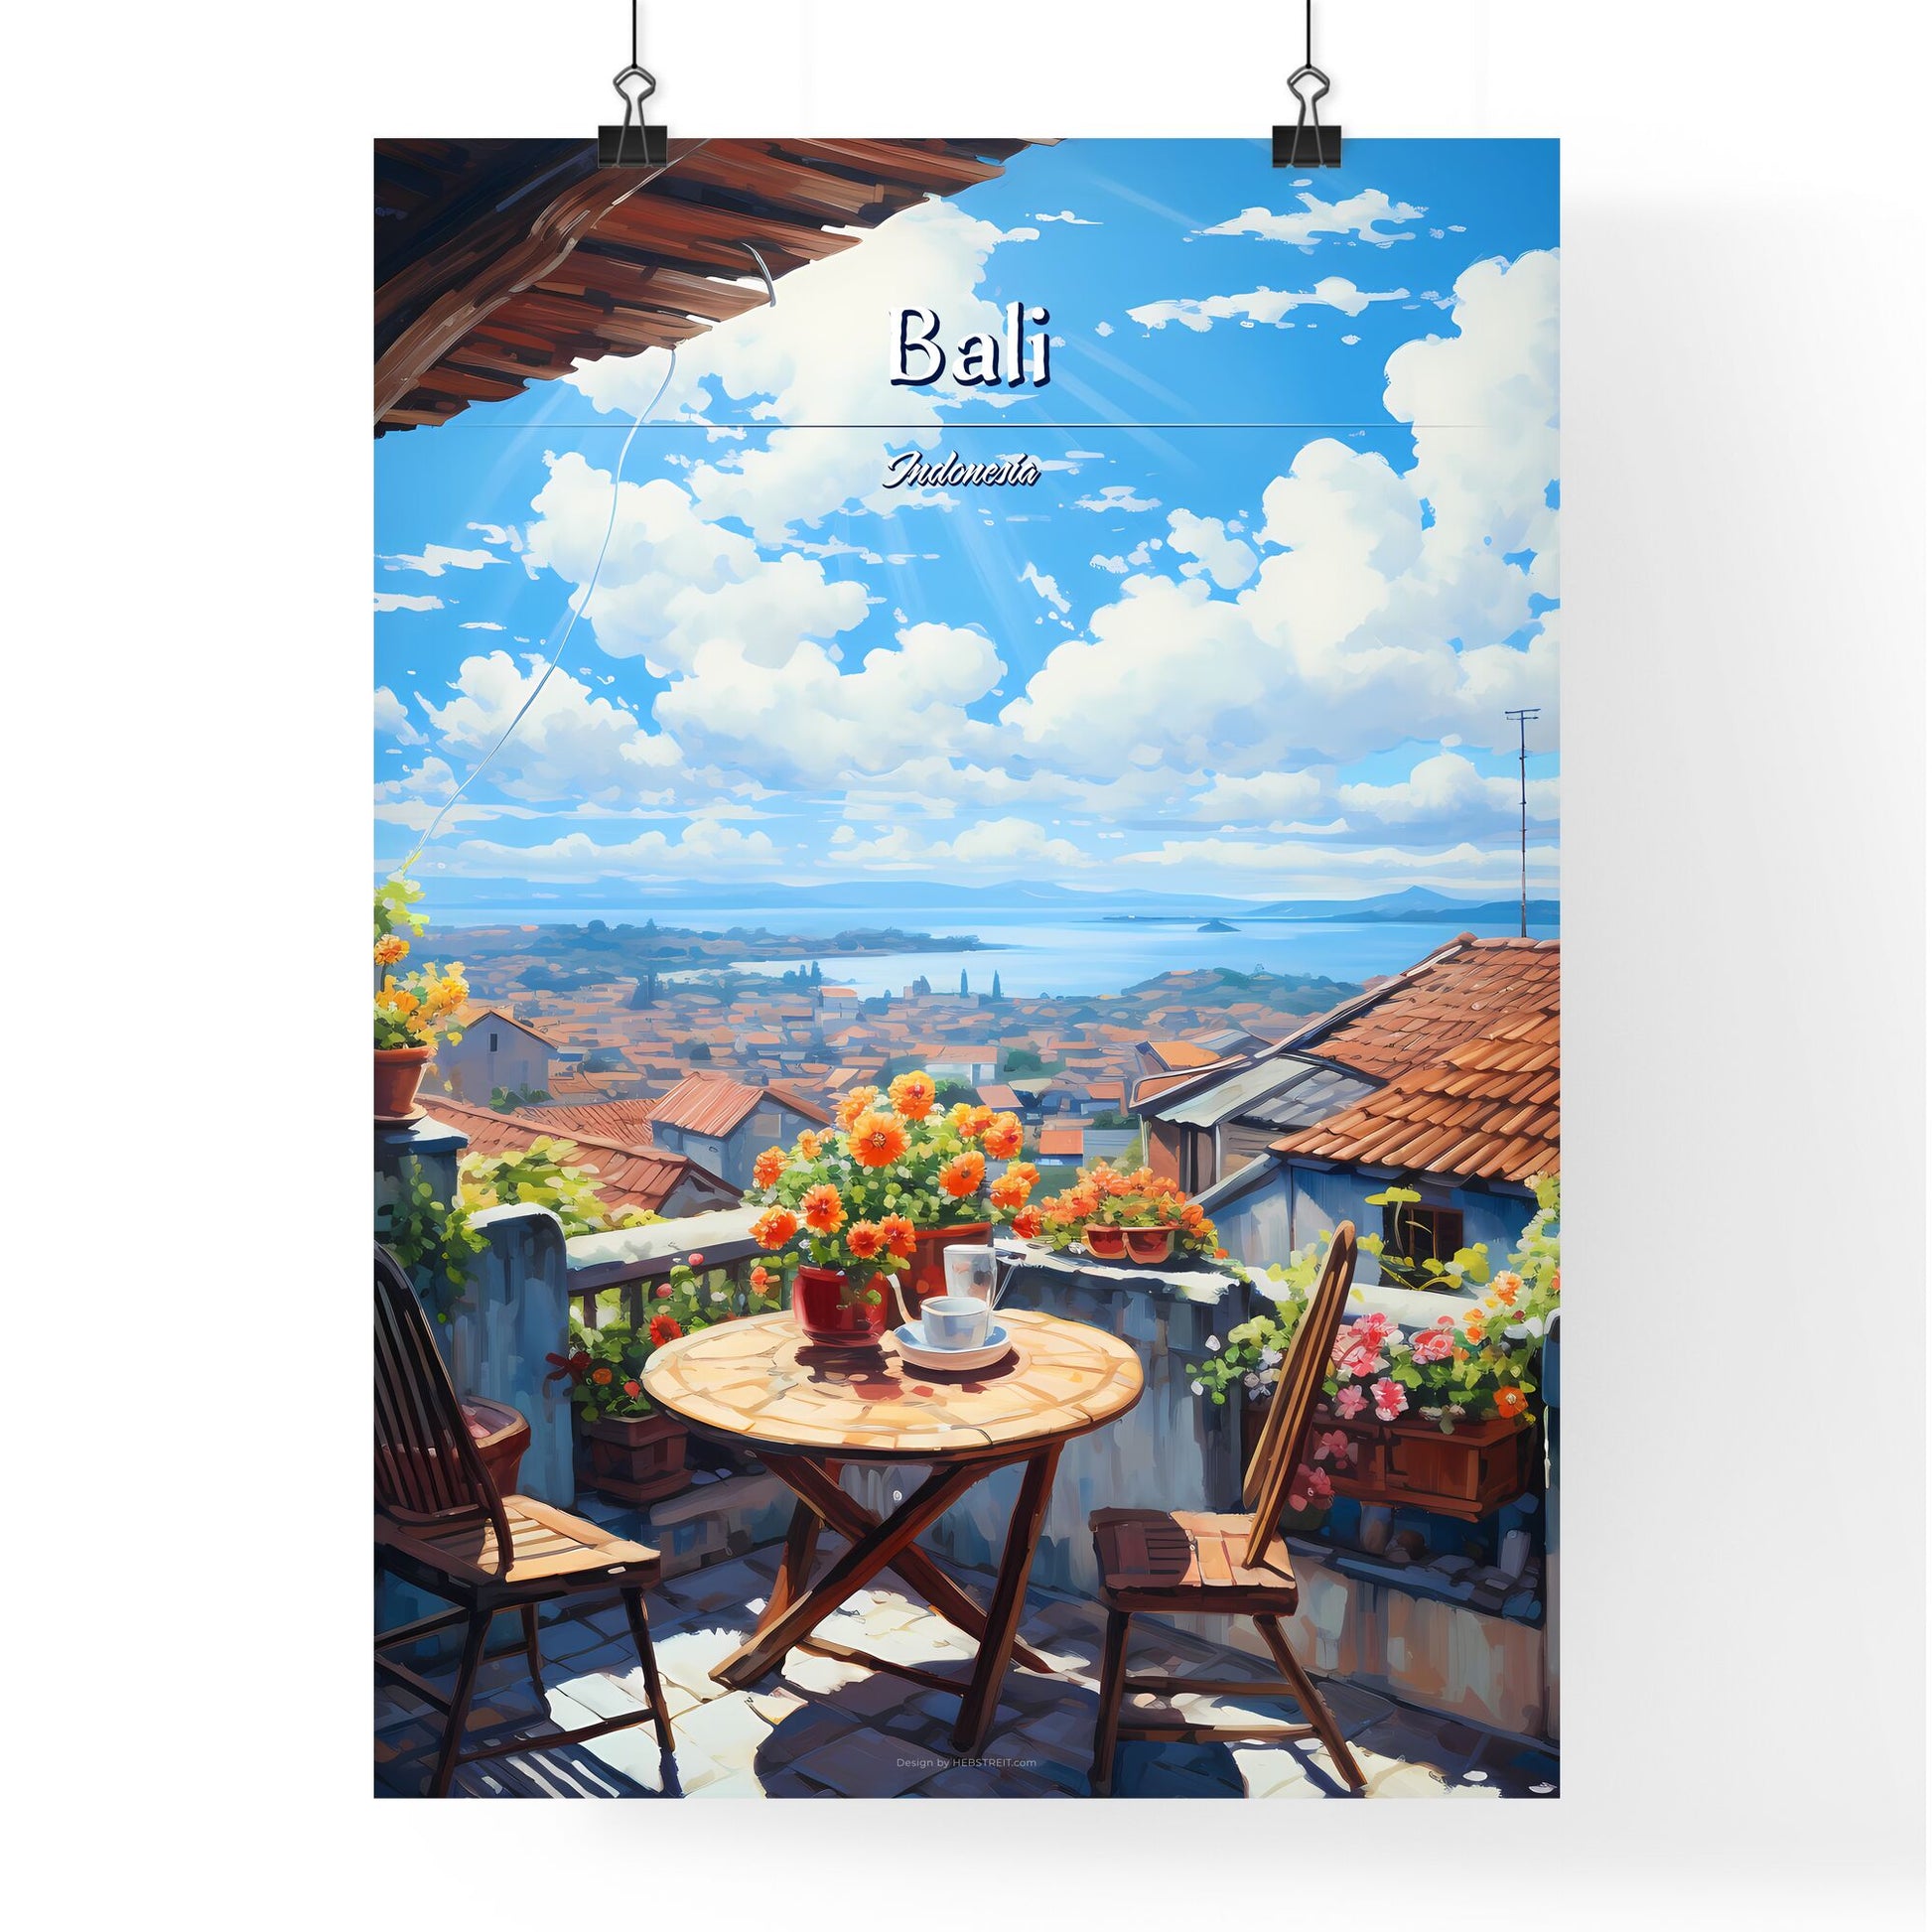 On the roofs of Bali, Indonesia - Art print of a table and chairs on a balcony with a view of a city and water Default Title